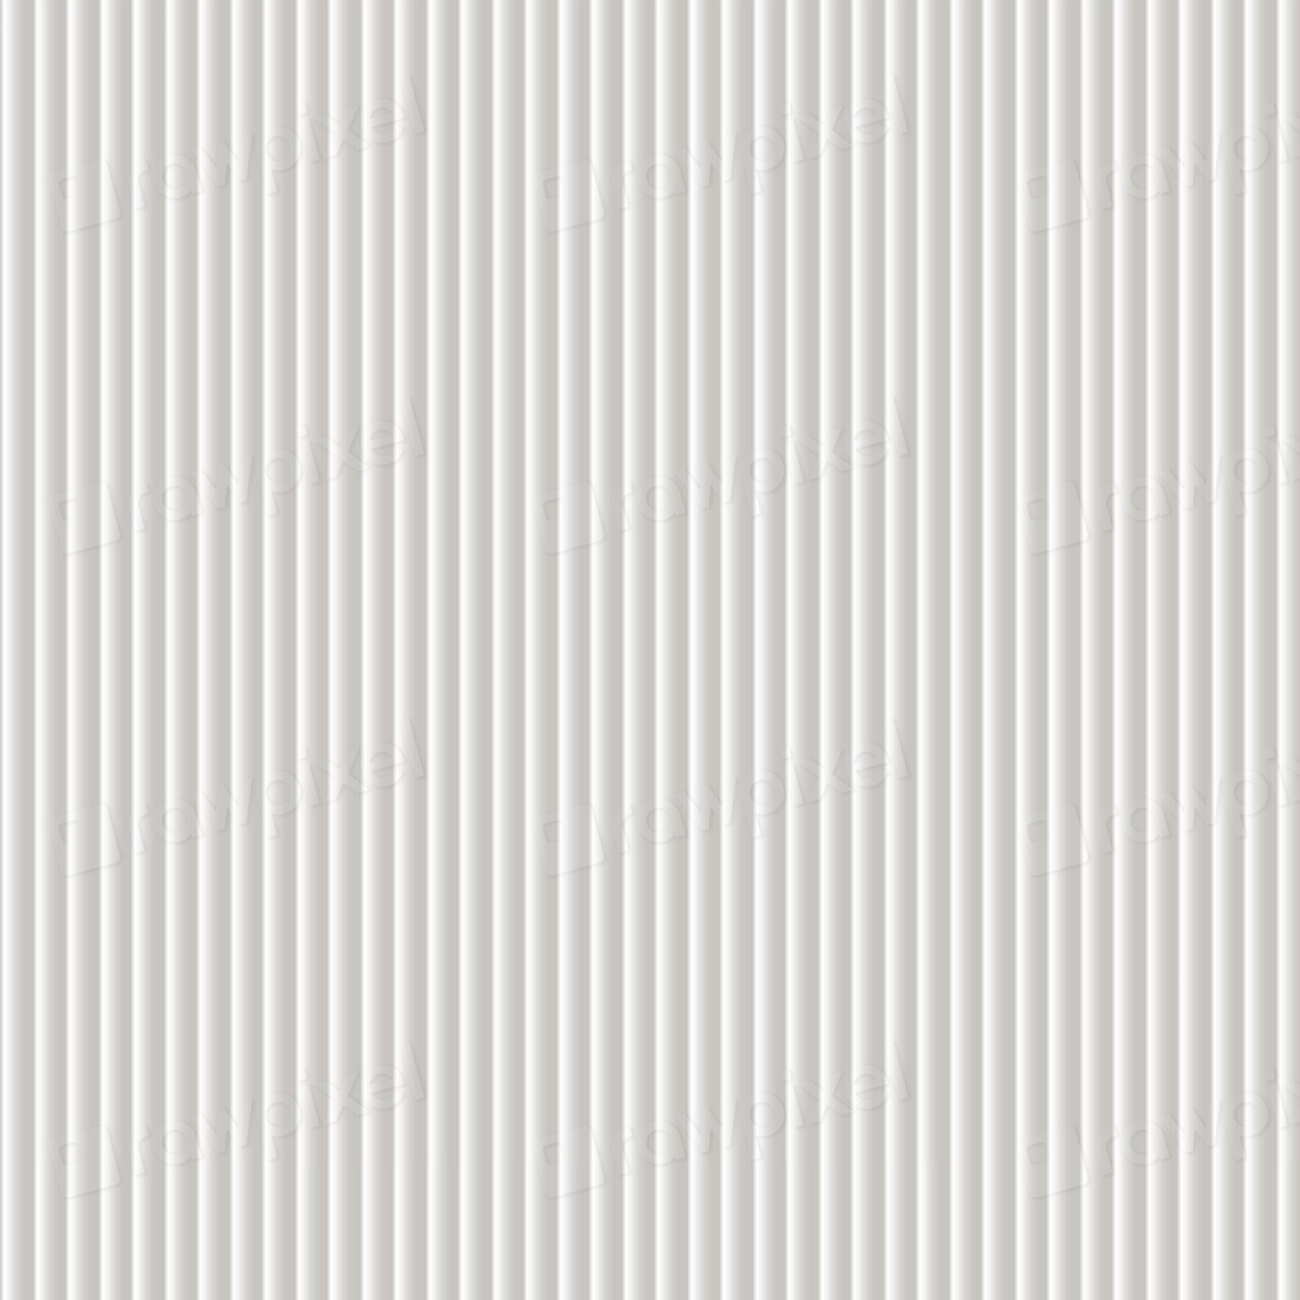 Simple gray striped seamless background | Premium Vector - rawpixel